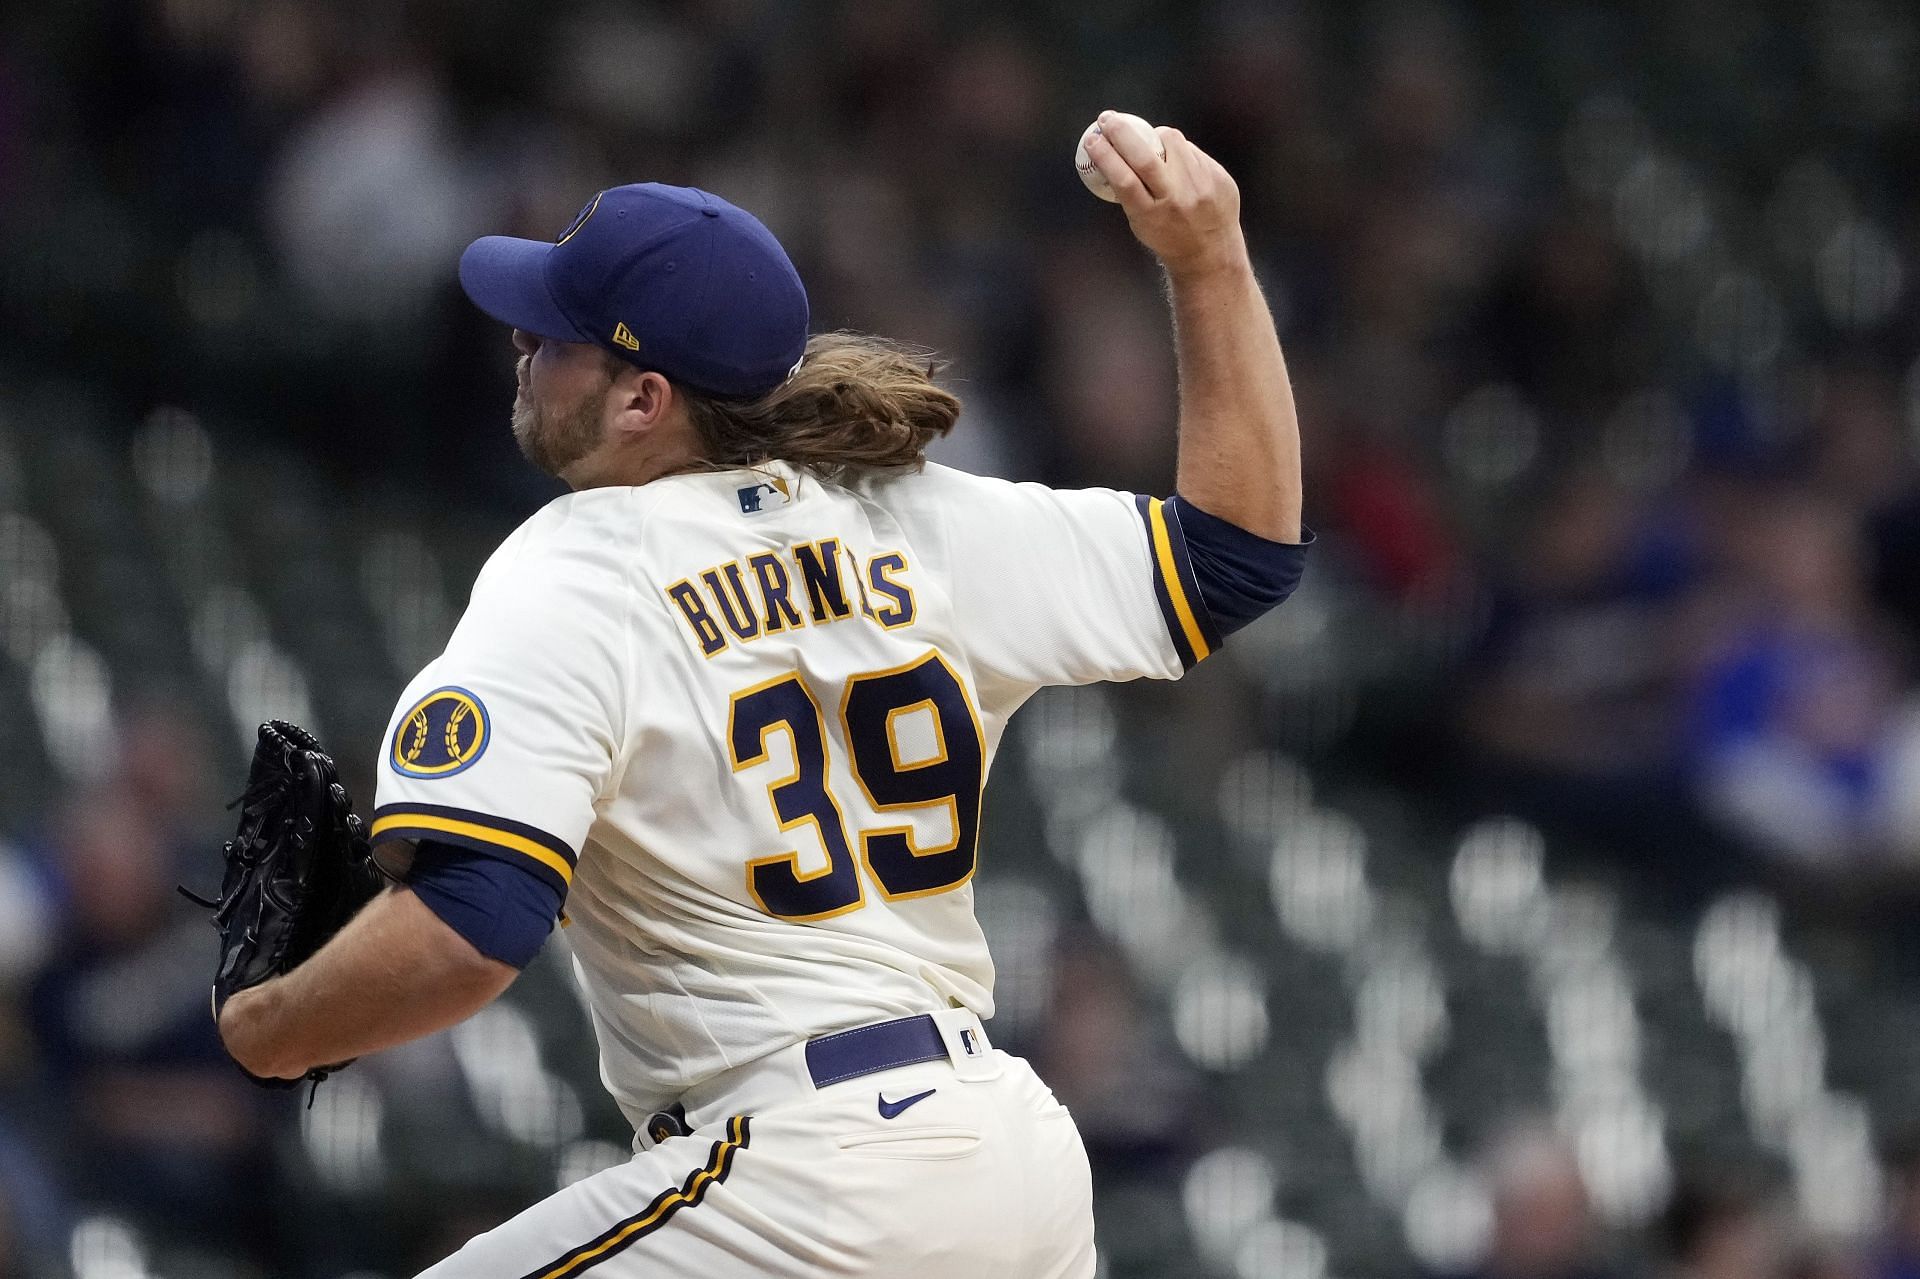 Corbin Burnes needs to replicate his 2021 form to help the Brewers